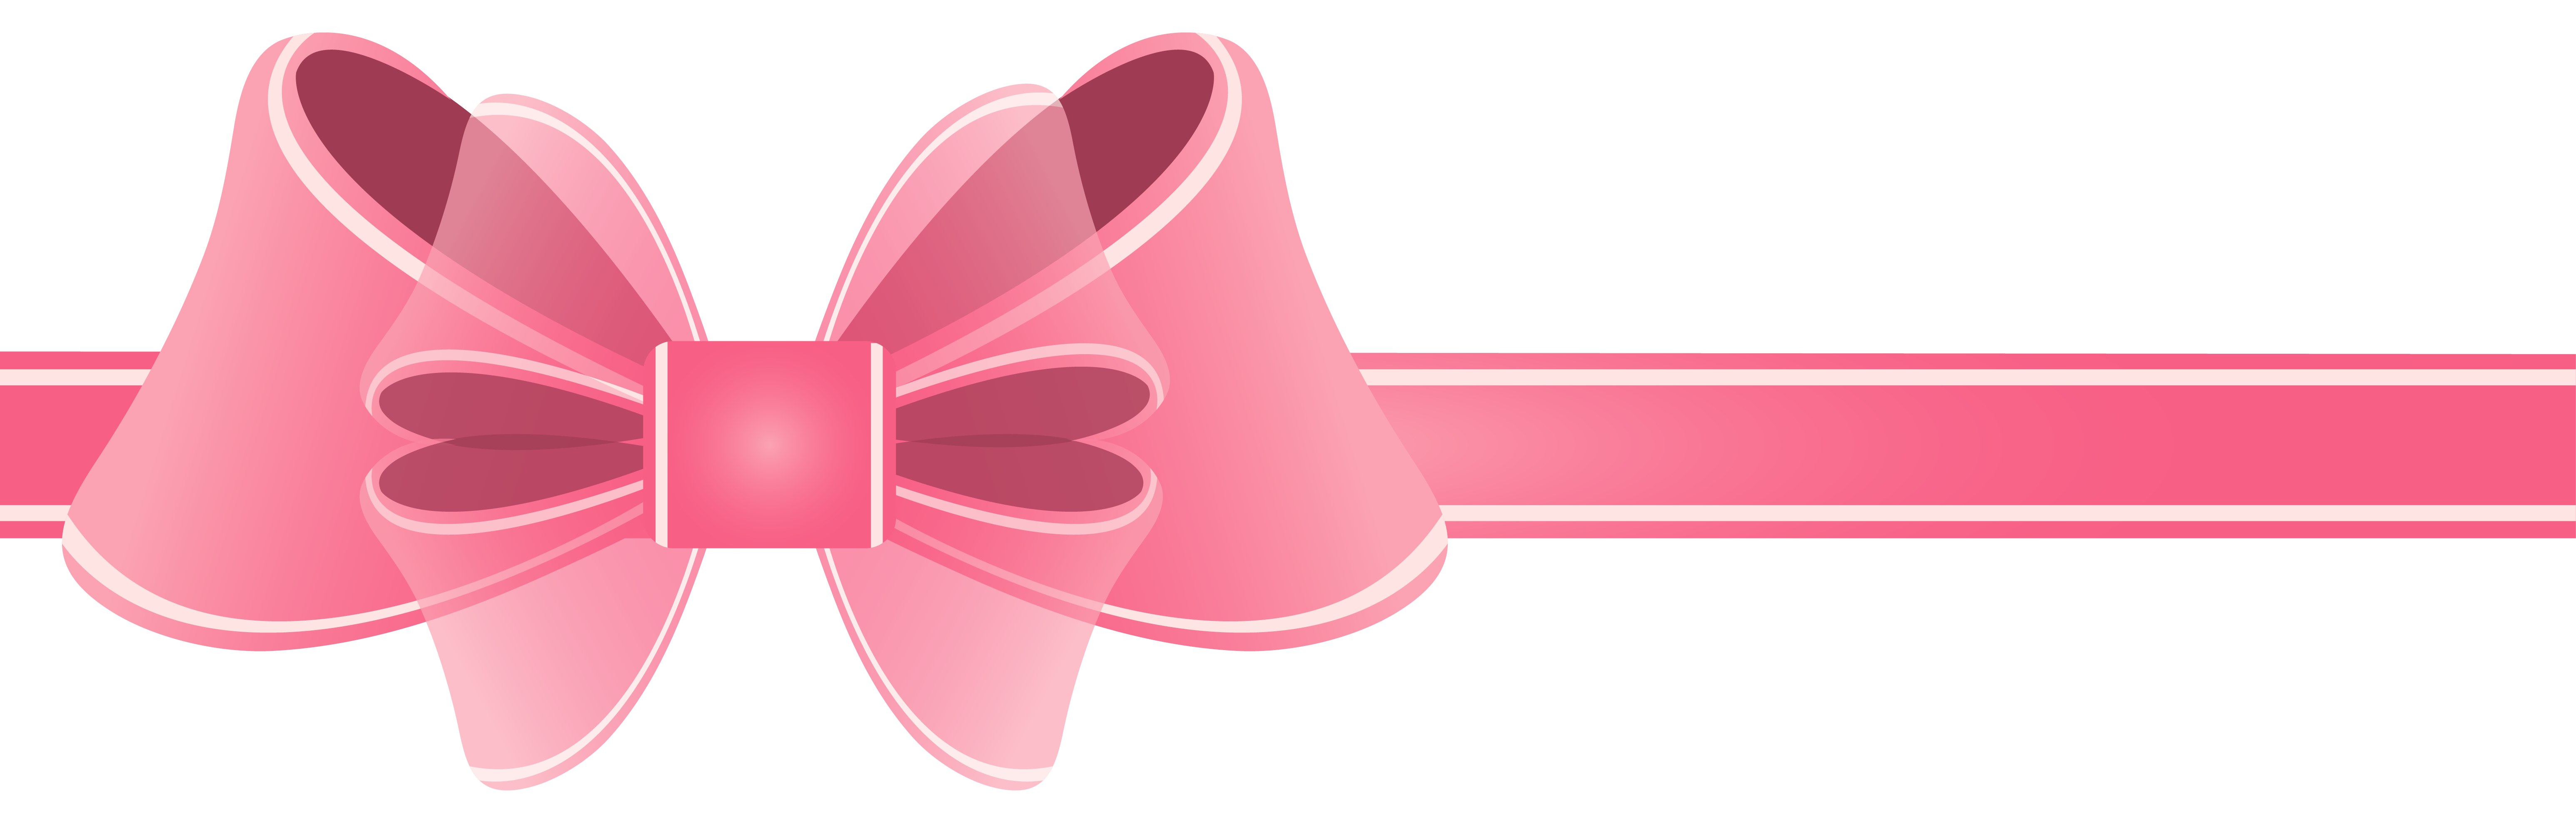 Wheel clipart pink. Ribbon png picture gallery